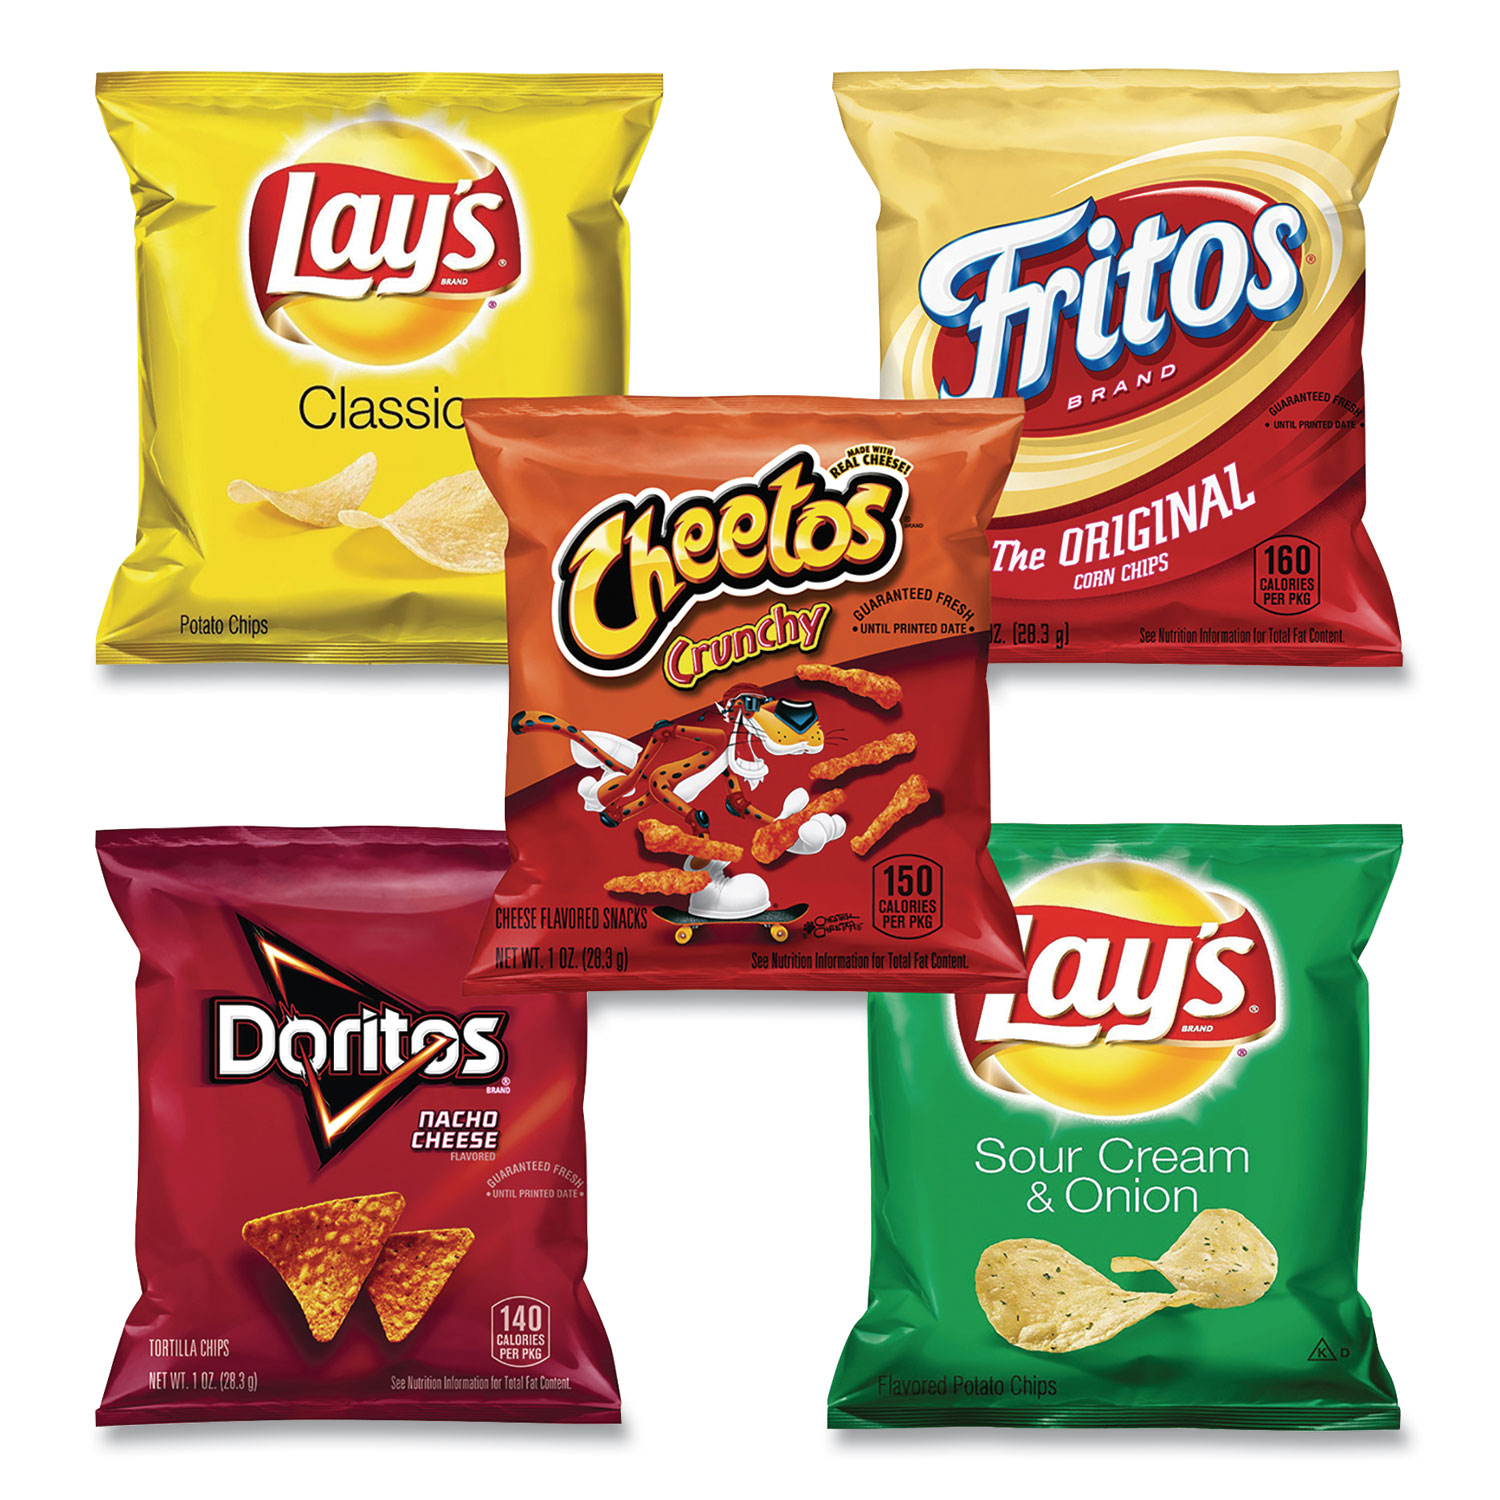 50 Count Frito Lay Chips | wordpress-331561-1541677.cloudwaysapps.com